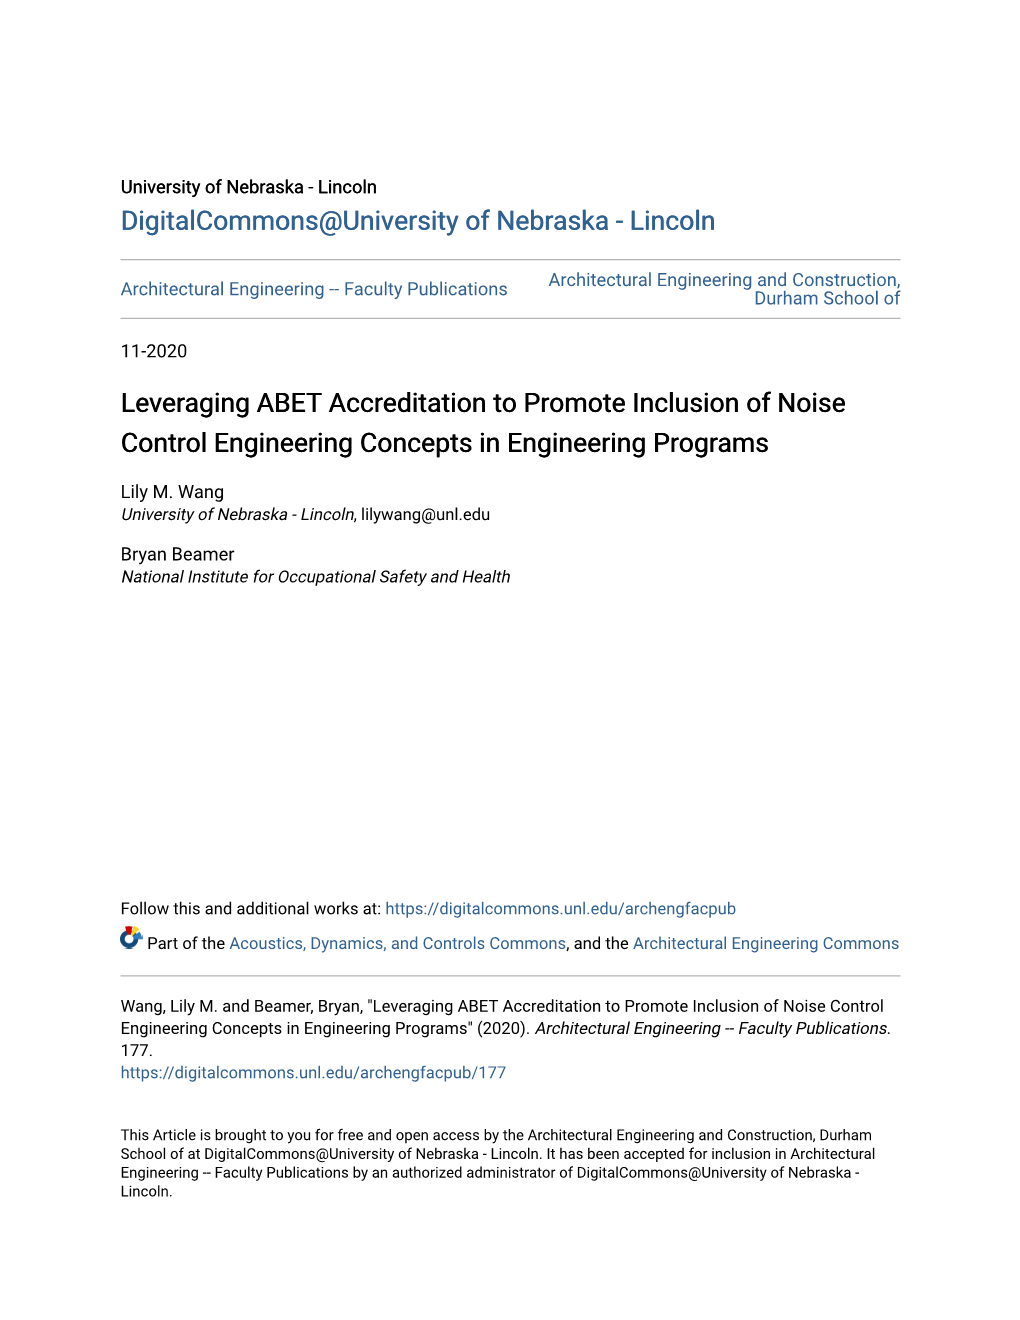 Leveraging ABET Accreditation to Promote Inclusion of Noise Control Engineering Concepts in Engineering Programs